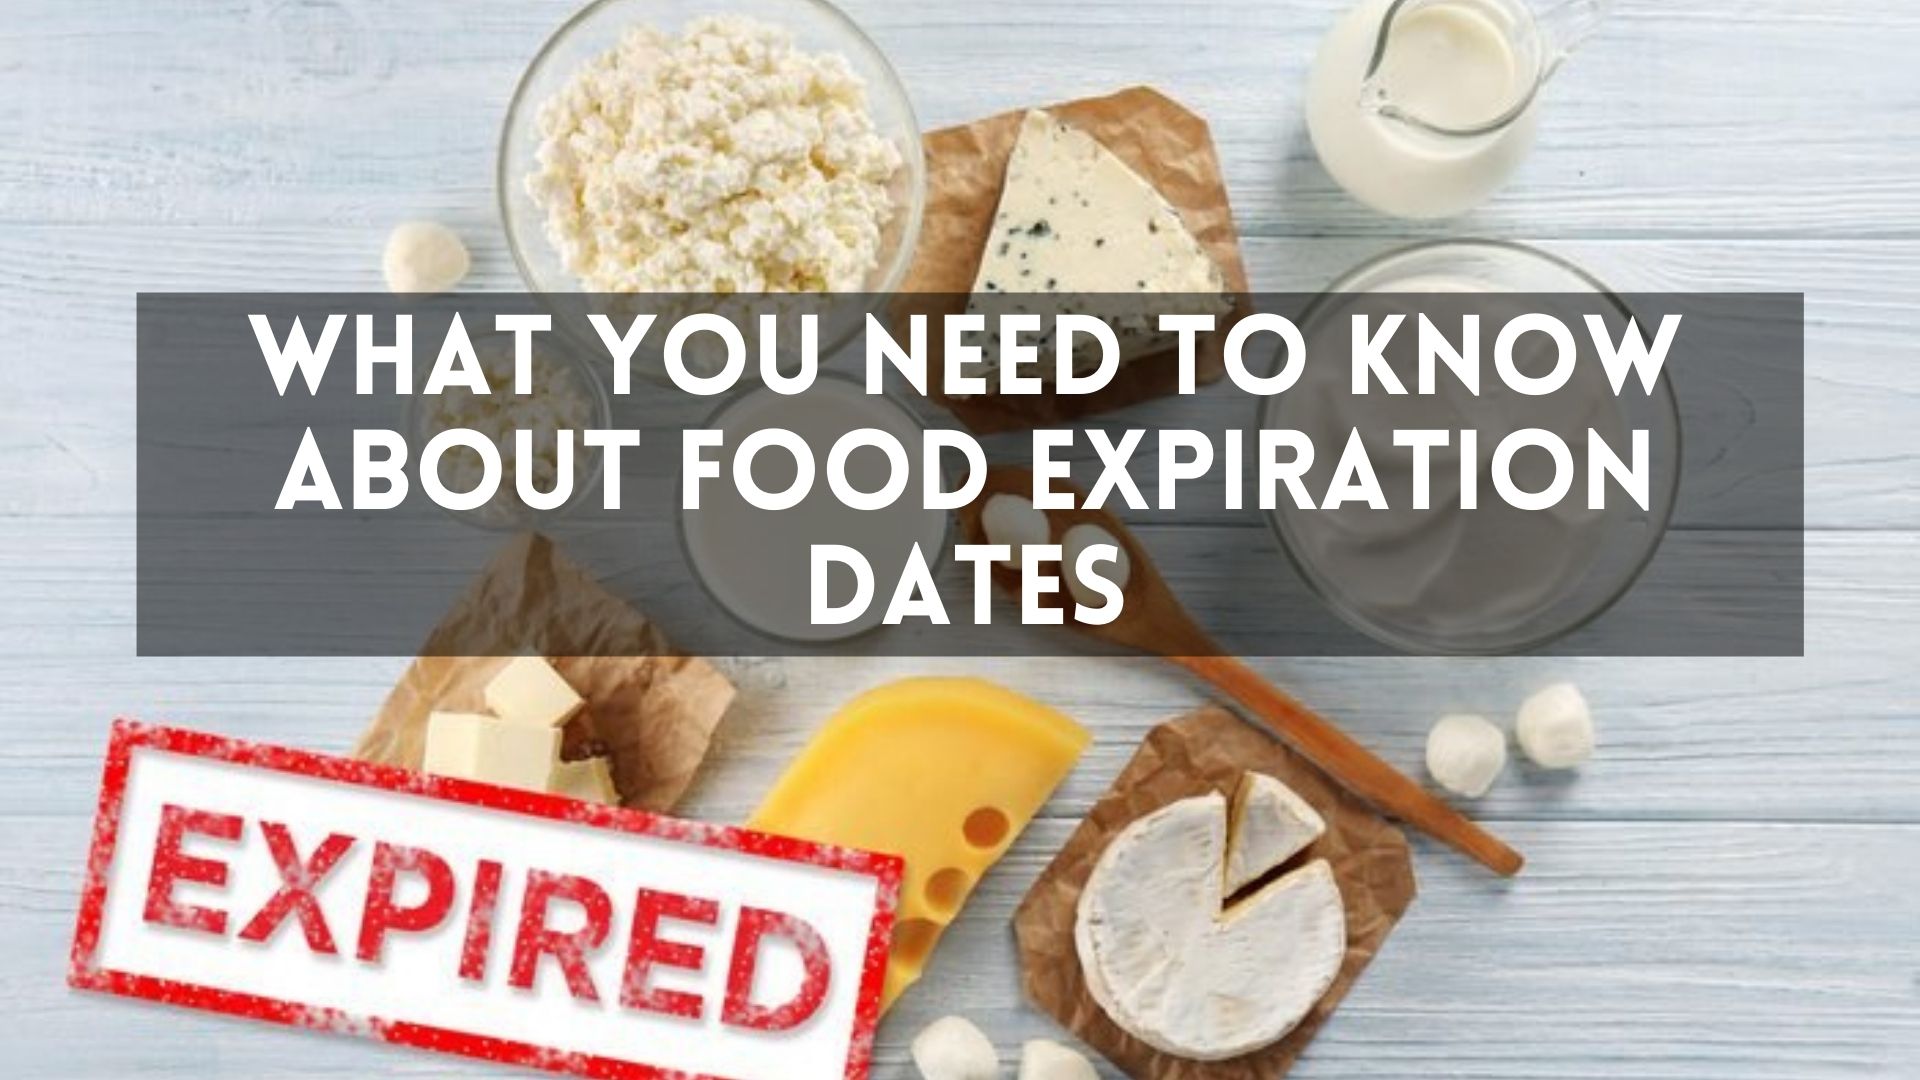 food-expiration-dates-what-to-know-about-them-bakersfun